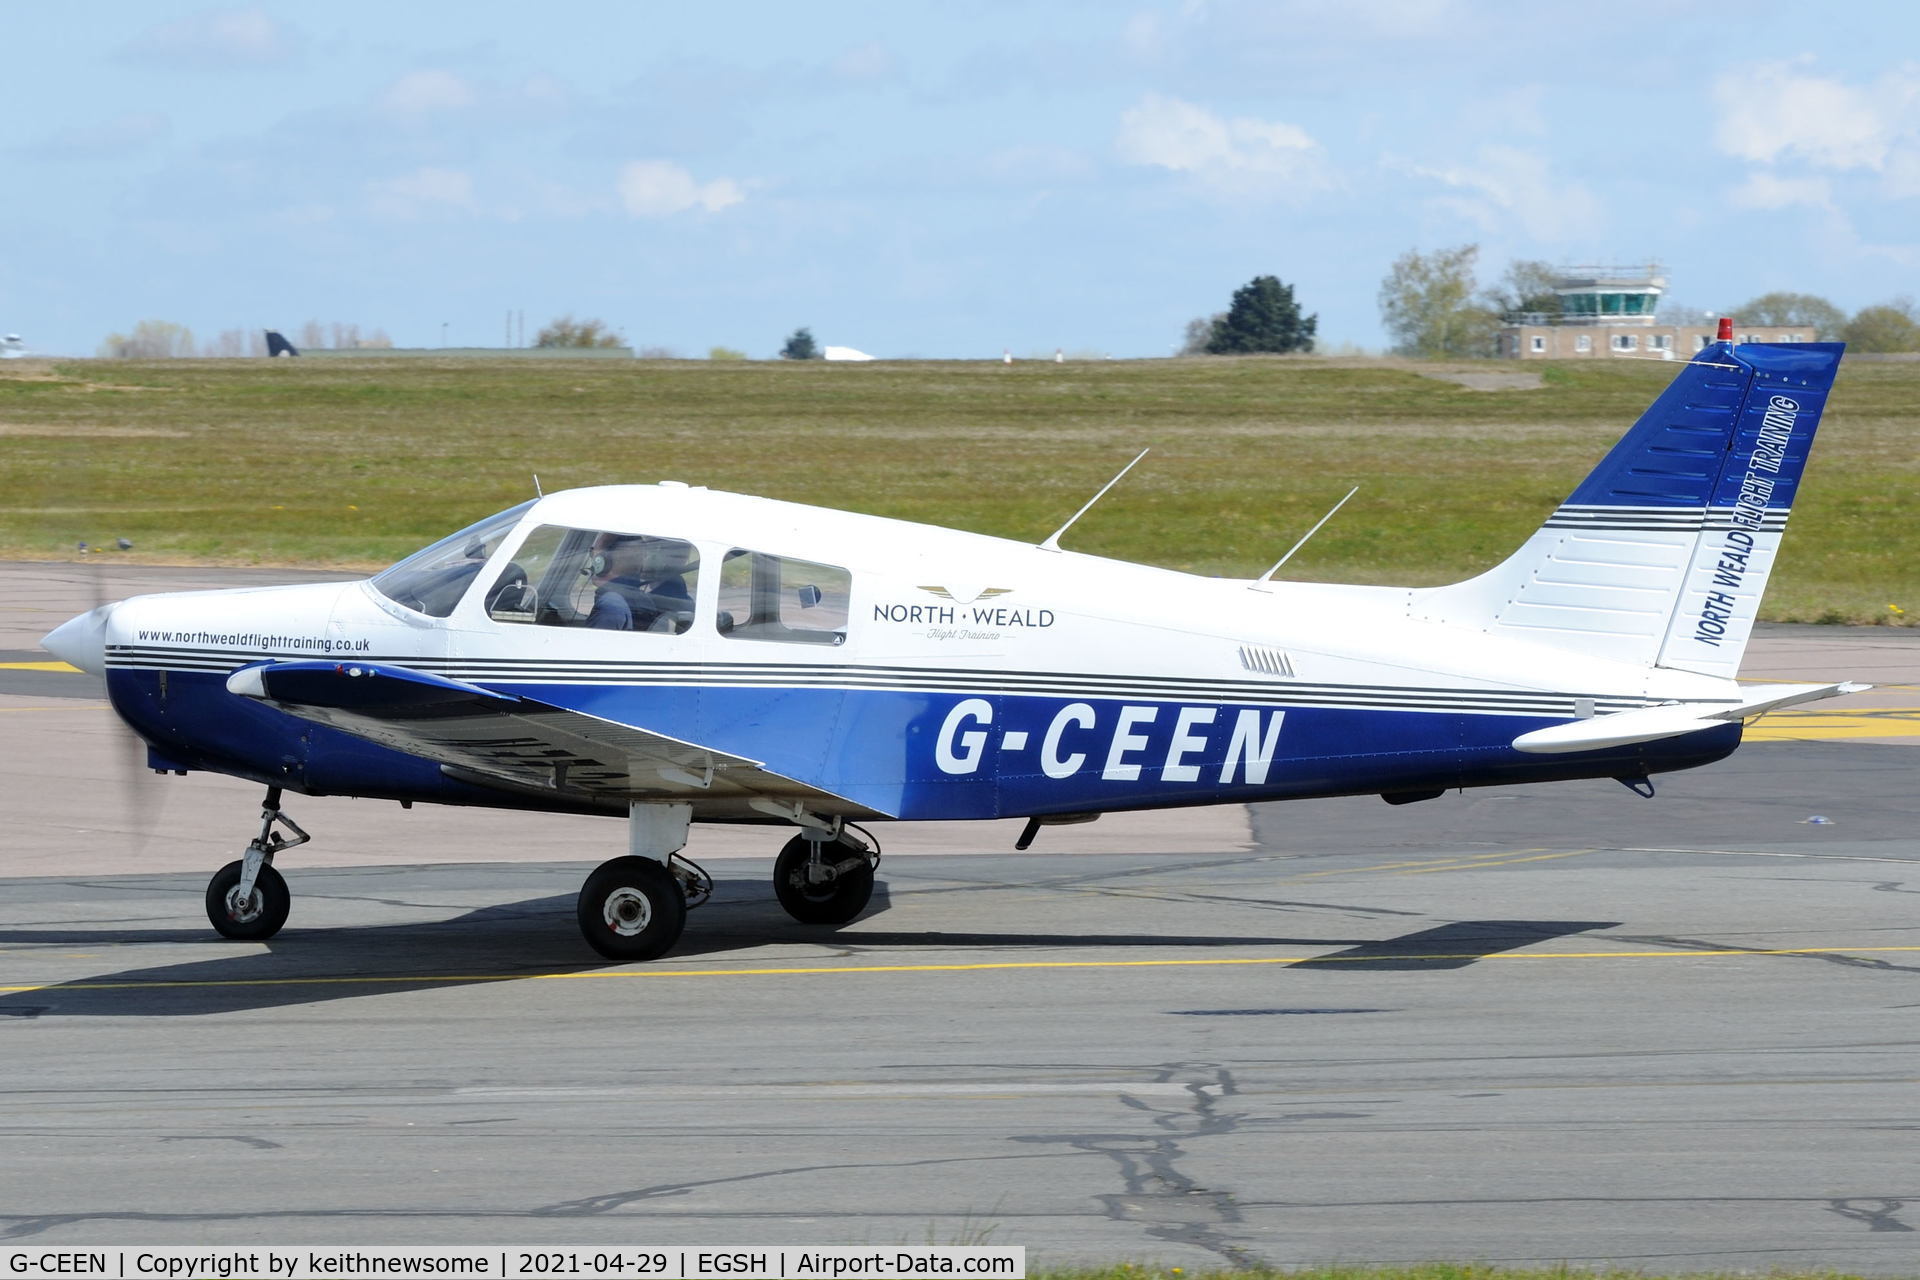 G-CEEN, 1990 Piper PA-28-161 Cadet C/N 2841293, Arriving at Norwich from North Weald.